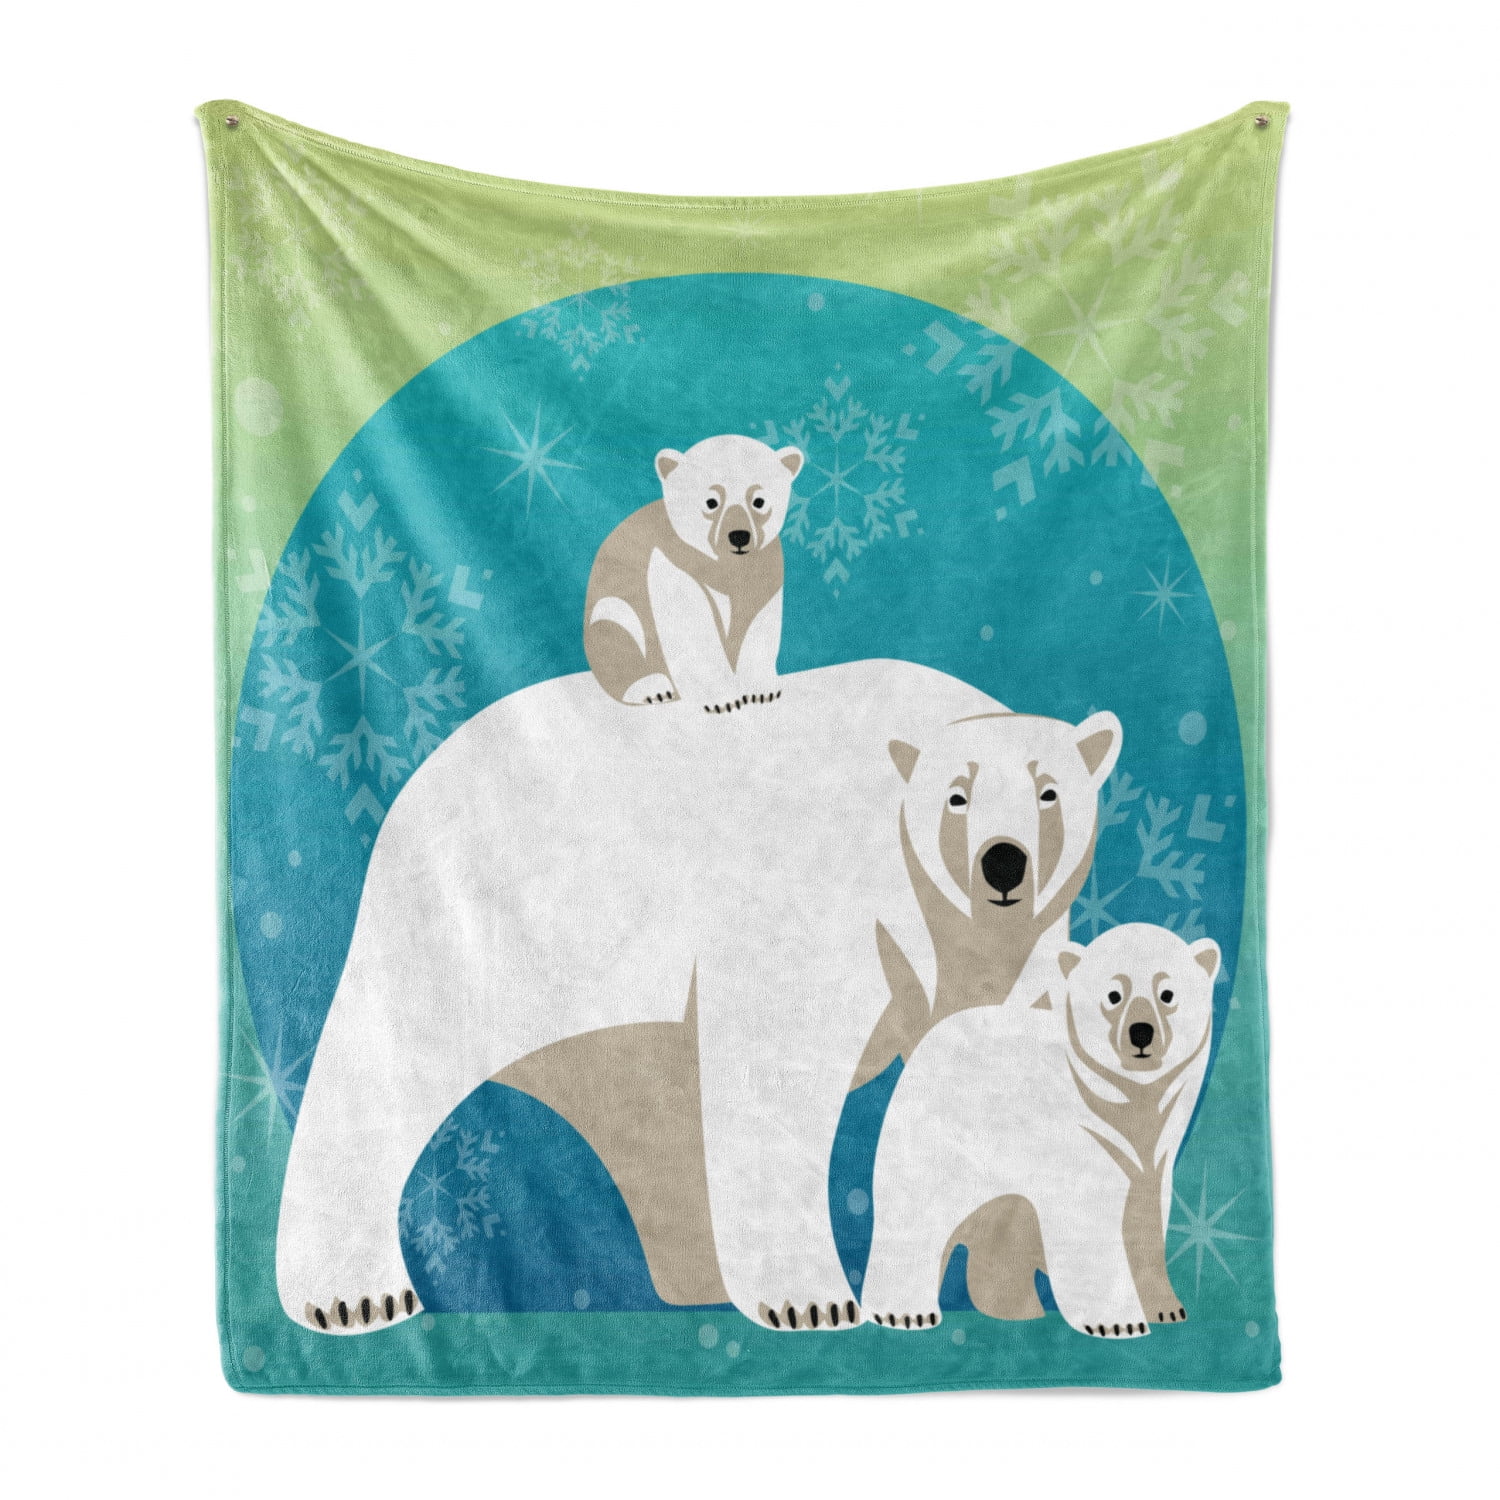 Flannel Fleece Blanket Full Size Polar Bear Blanket,All-Season Plush Blanket for Couch Bed Travelling Camping Or Kids Adults 60X50